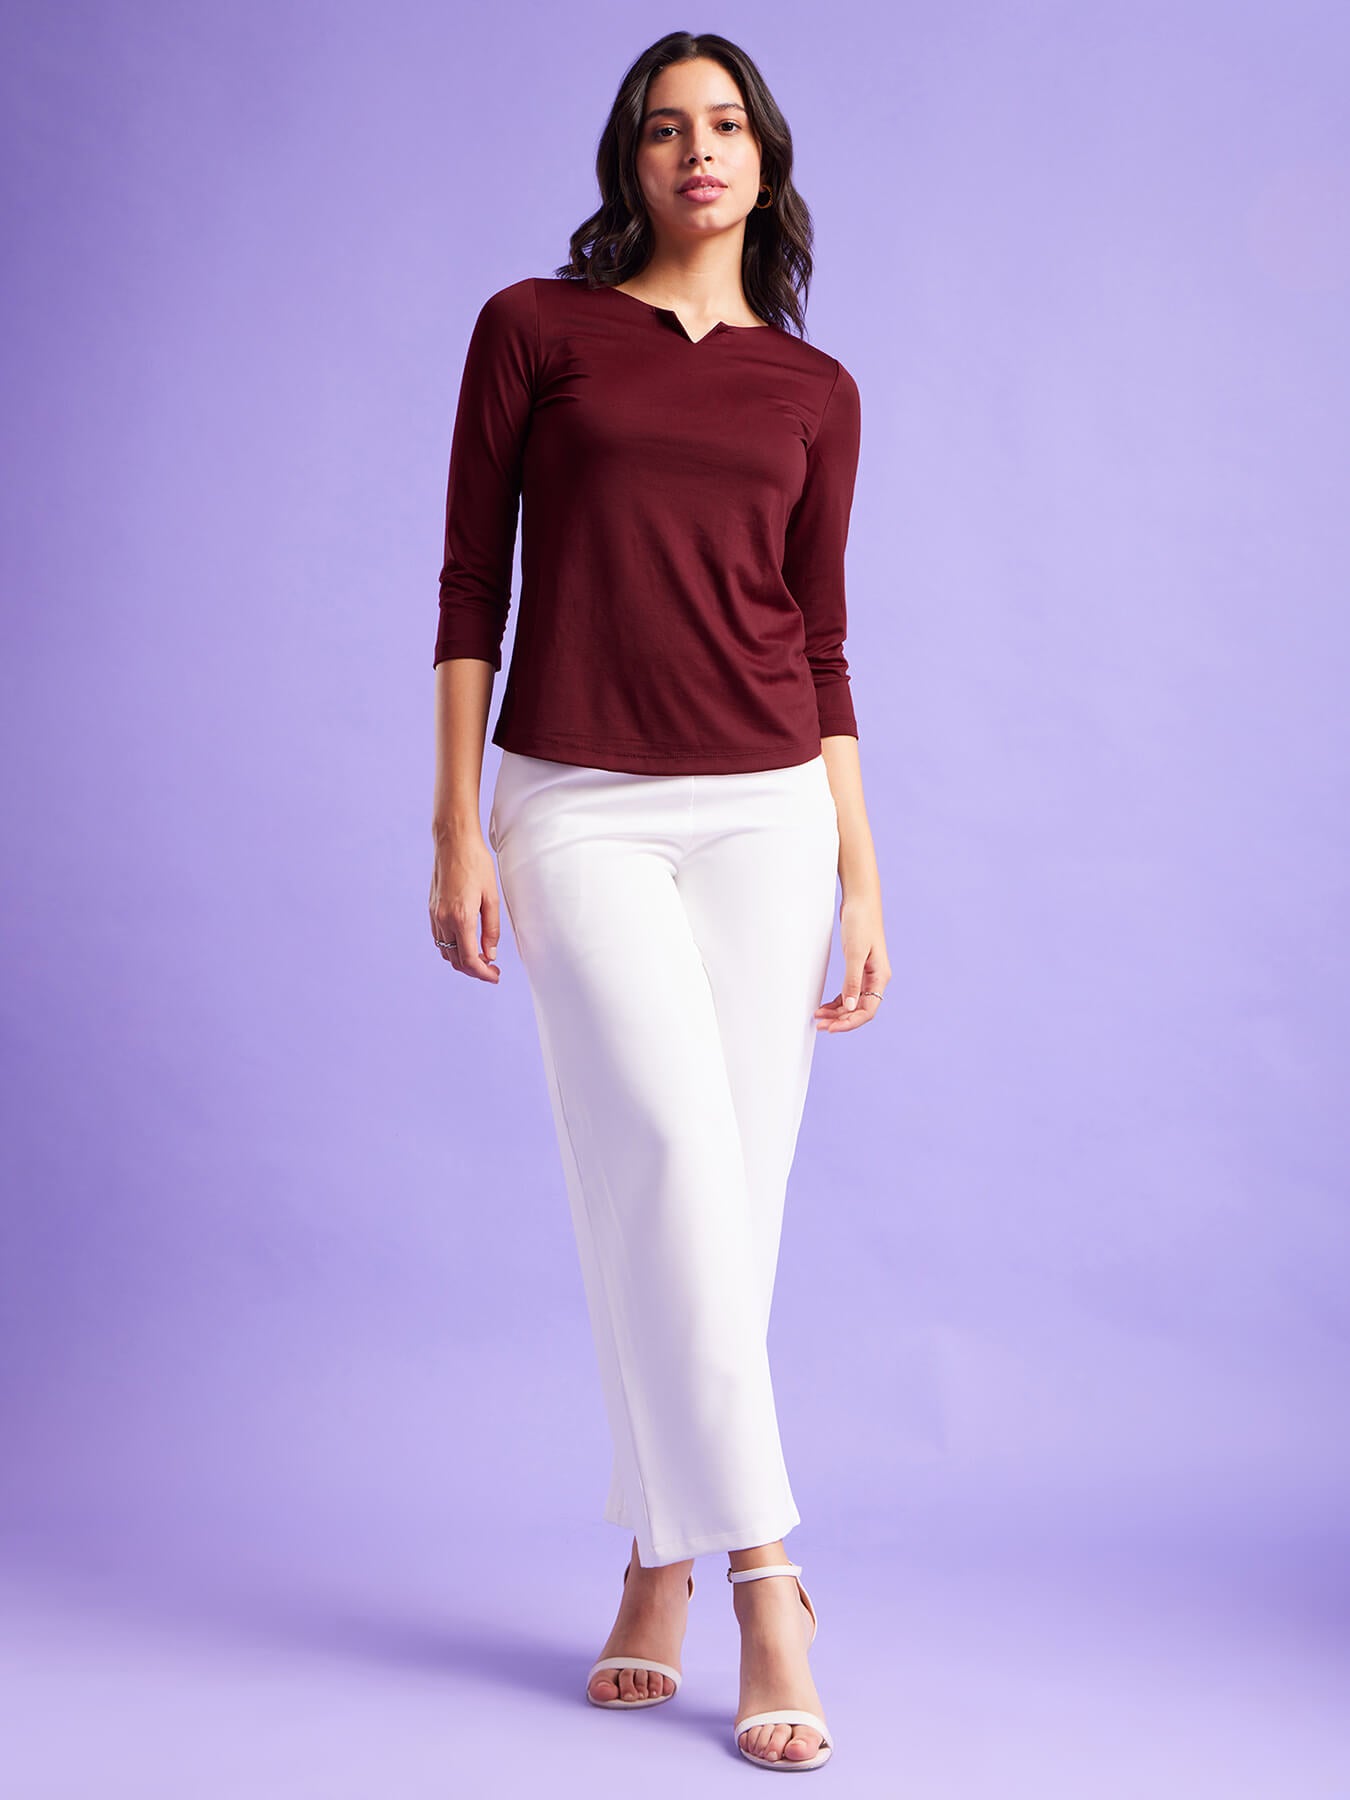 Round V Neck Solid Top - Maroon